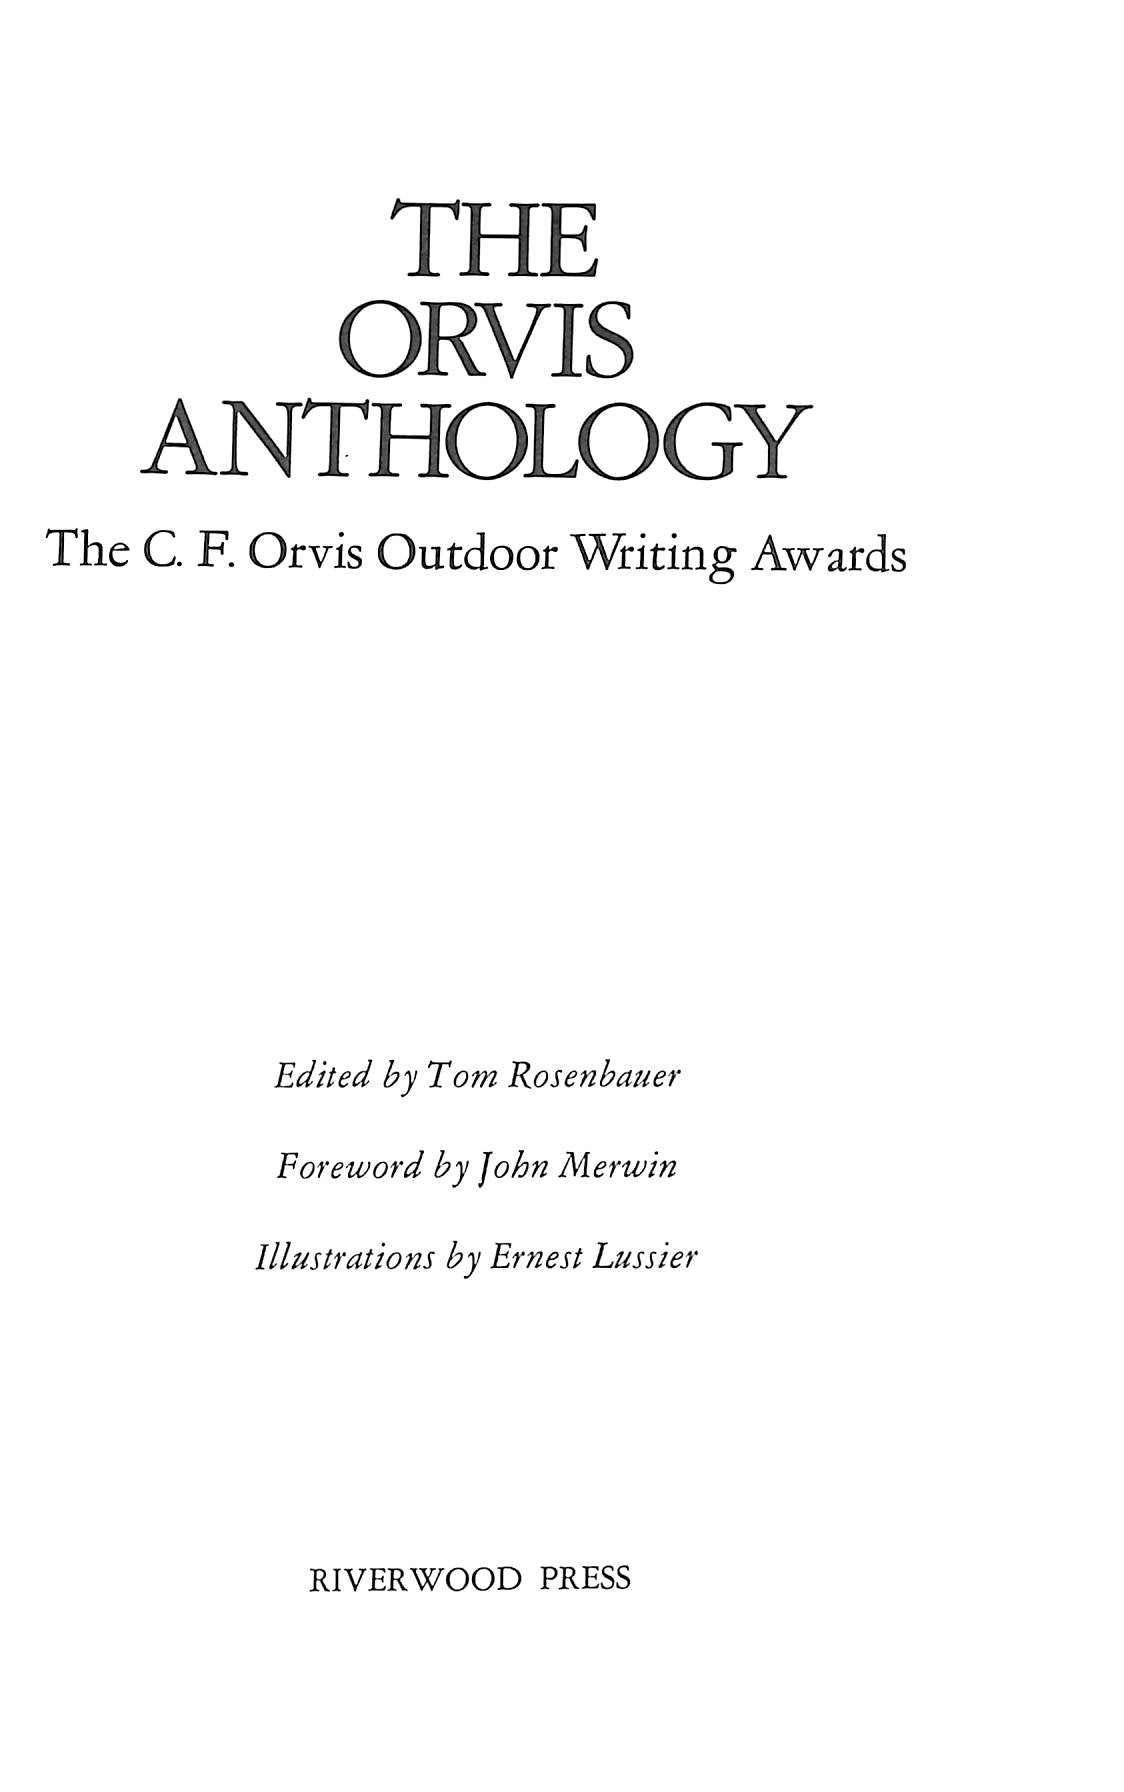 The Orvis Anthology: The C.F. Orvis Outdoor Writing Awards 1984 ROSE